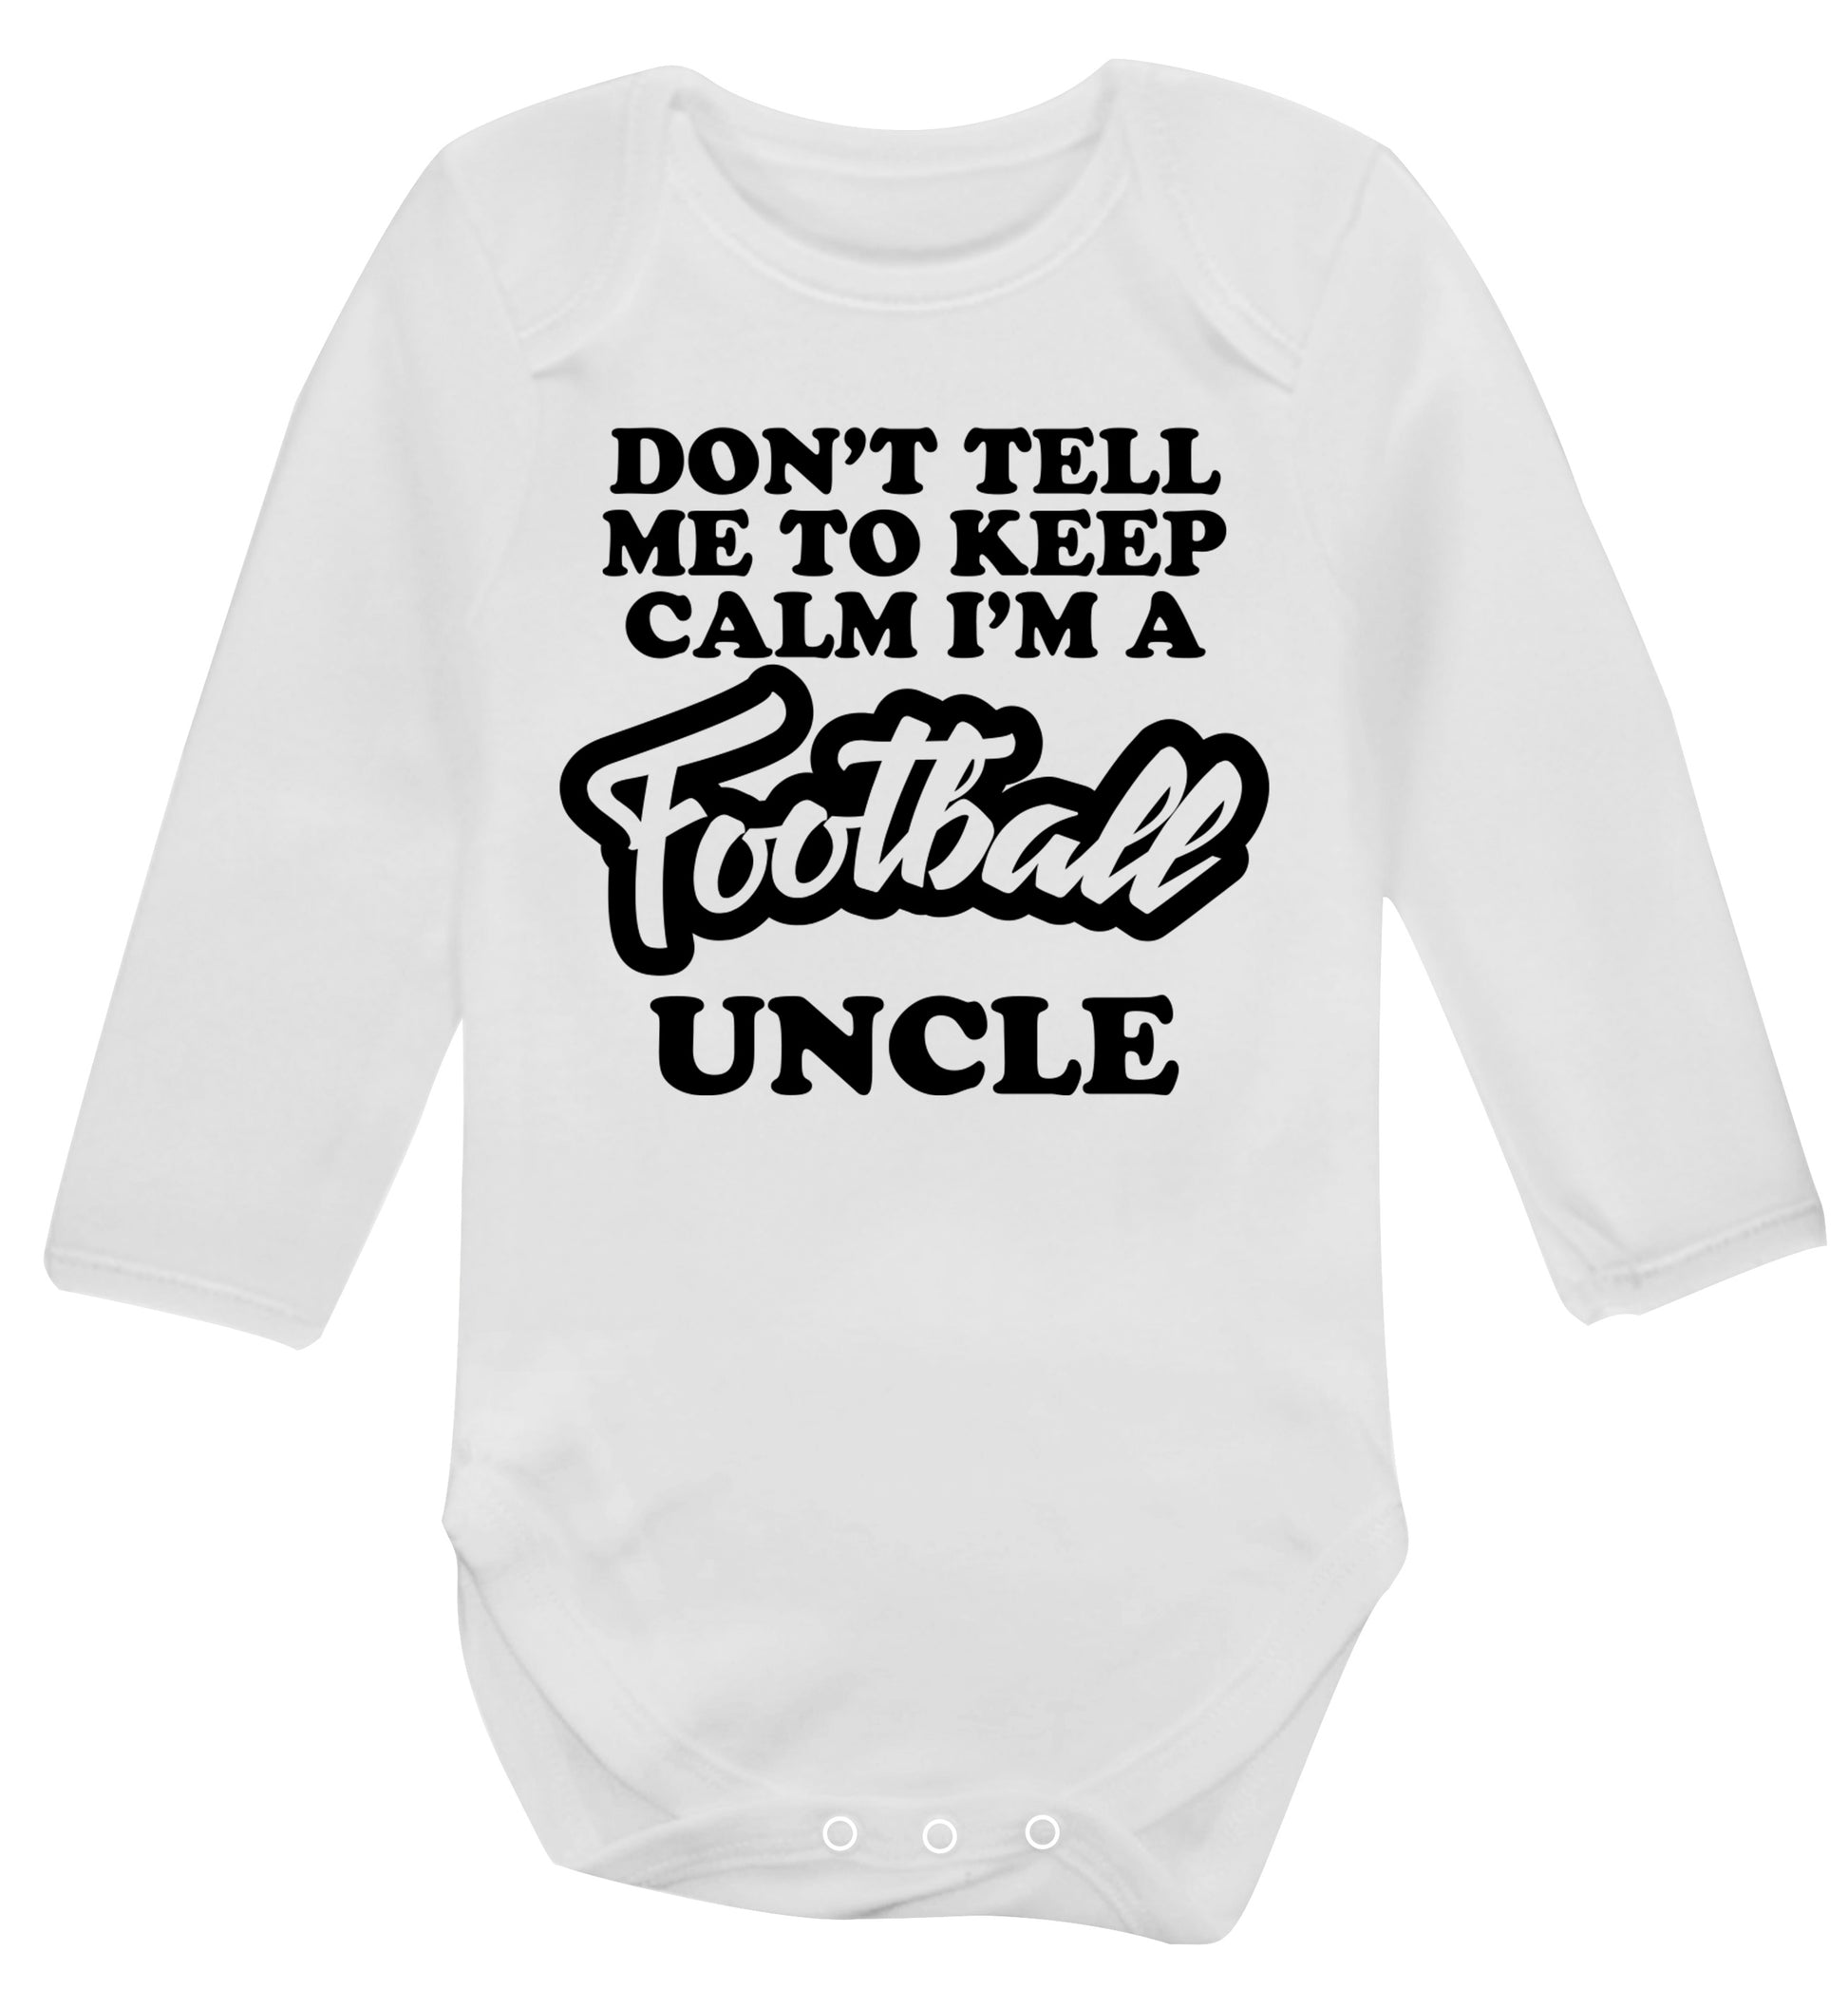 Don't tell me to keep calm I'm a football uncle Baby Vest long sleeved white 6-12 months